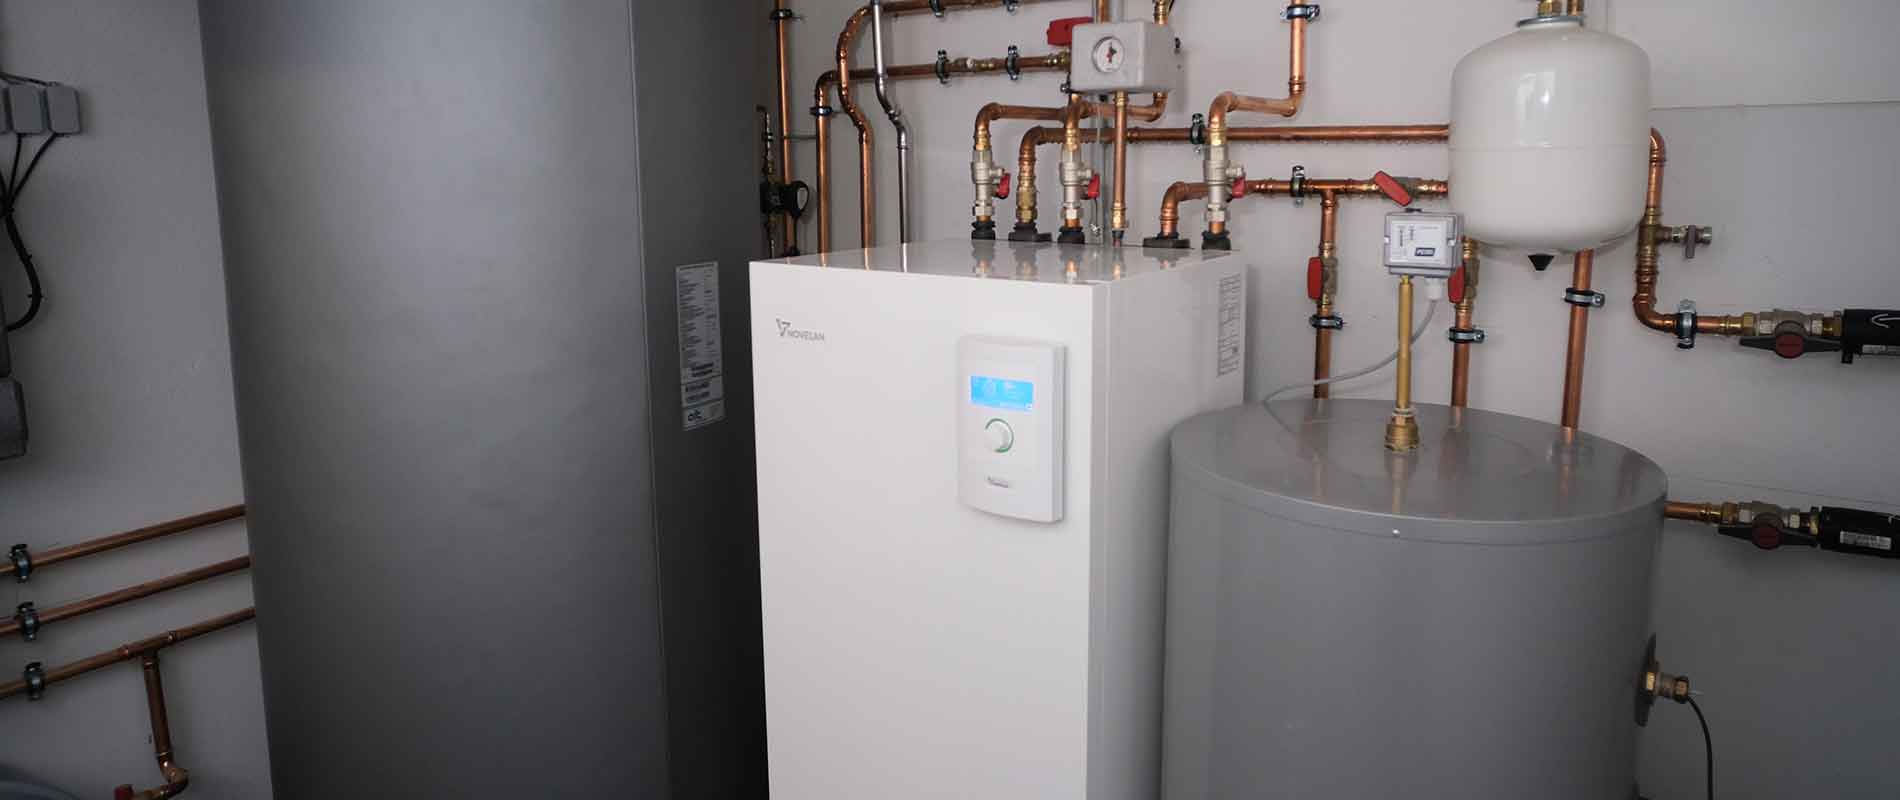 The WSV heat pump stands inside the boiler room, with puffer tanks on both sides and pipes extending on and inside the wall behind.